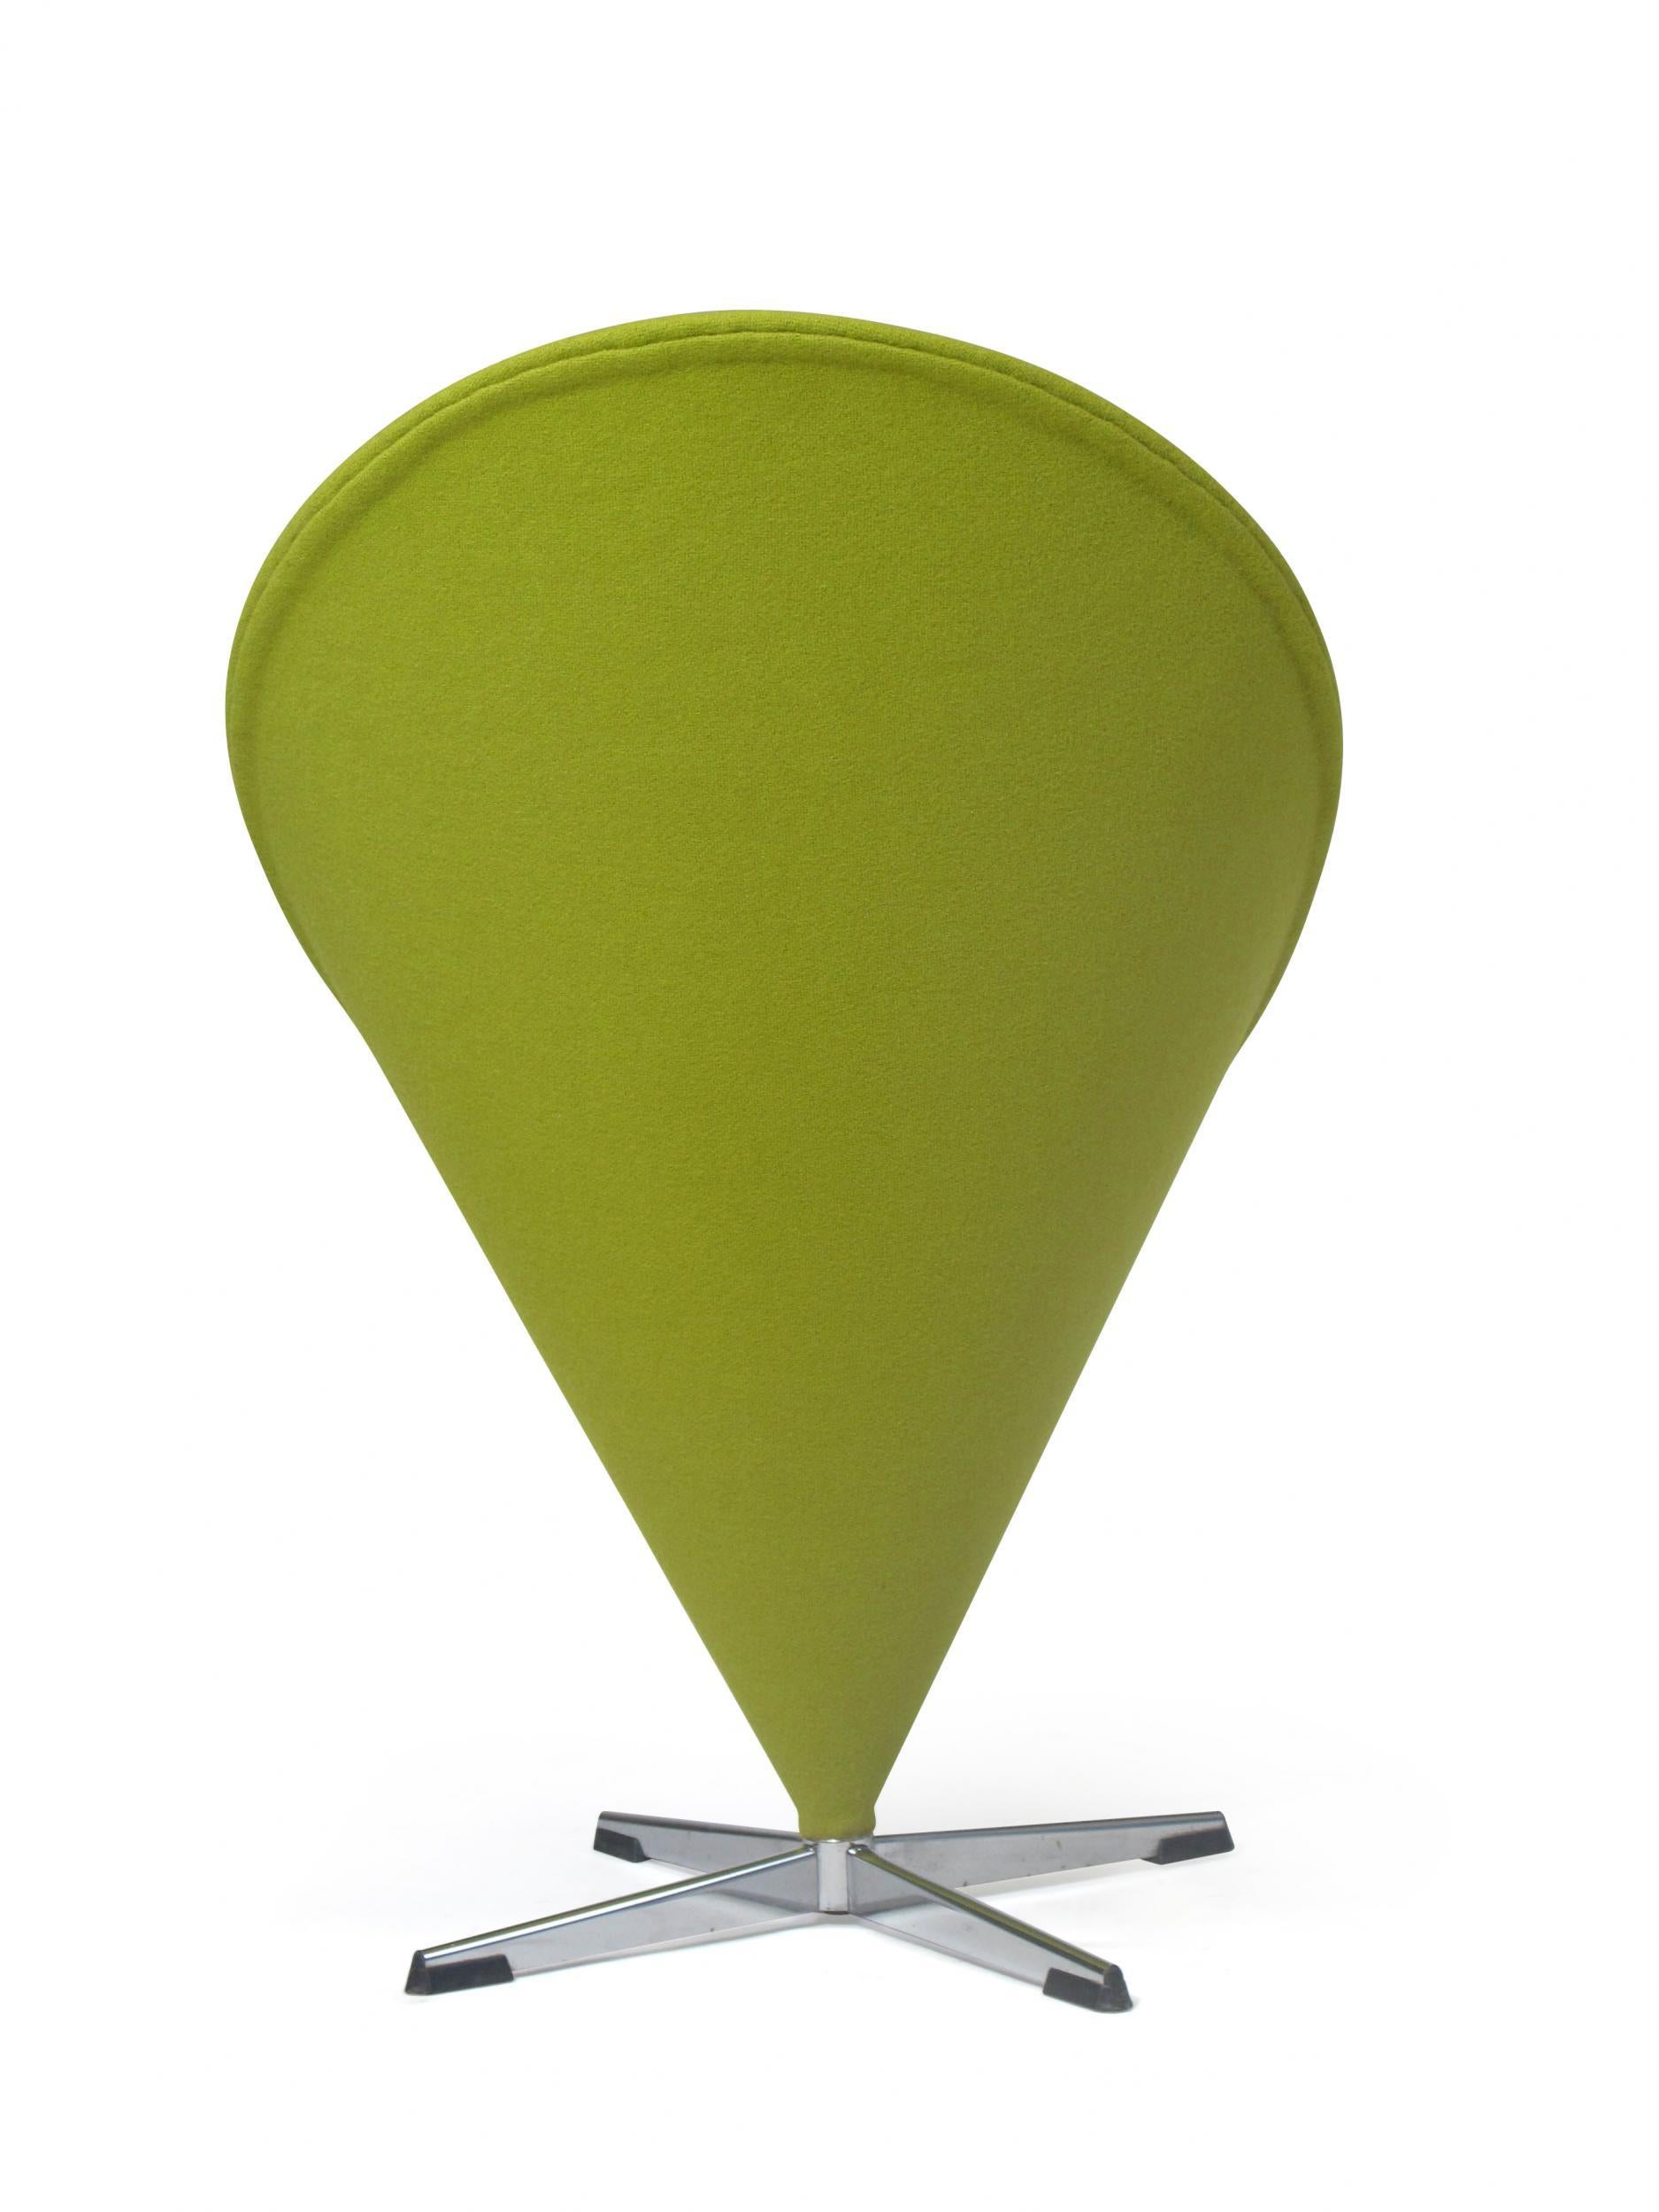 Verner Panton Cone Chair In Excellent Condition For Sale In Oakland, CA